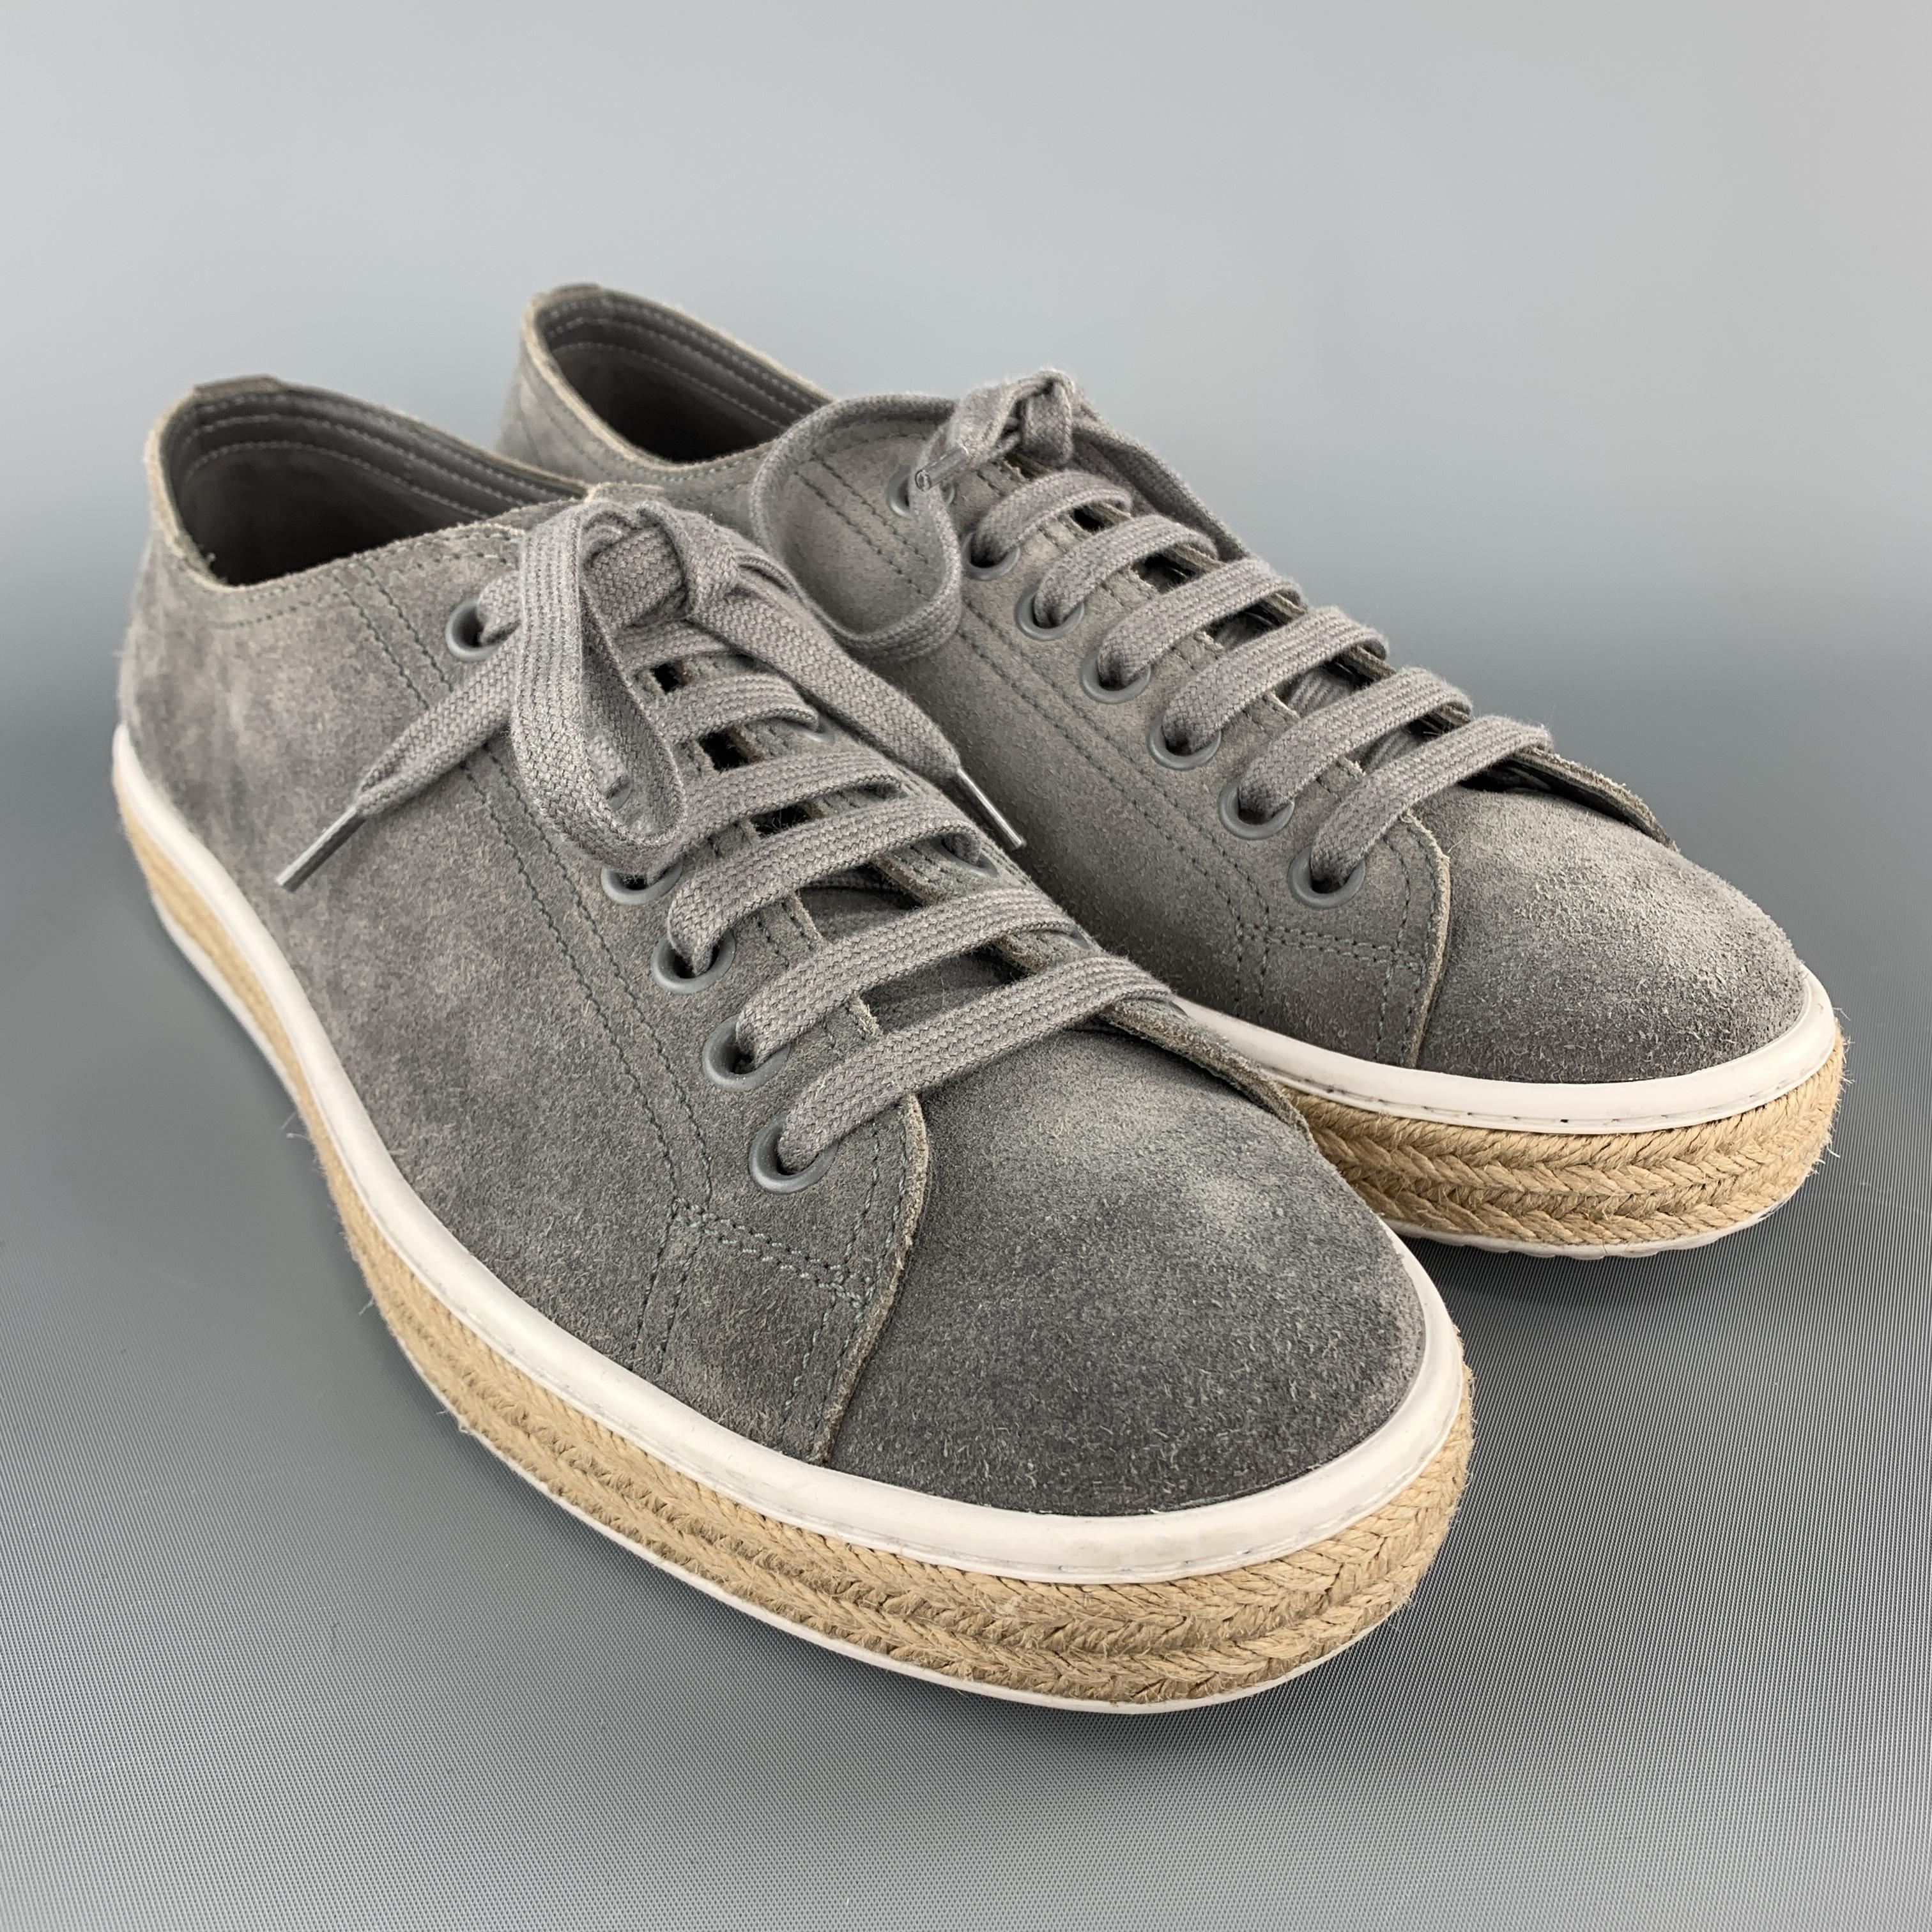 PRADA low top sneakers come in gray suede with a white rubber sole and braided midsole. Made in Italy.

Very Good Pre-Owned Condition.
Marked: UK 8.5 

Outsole: 11.75 x 4 in.